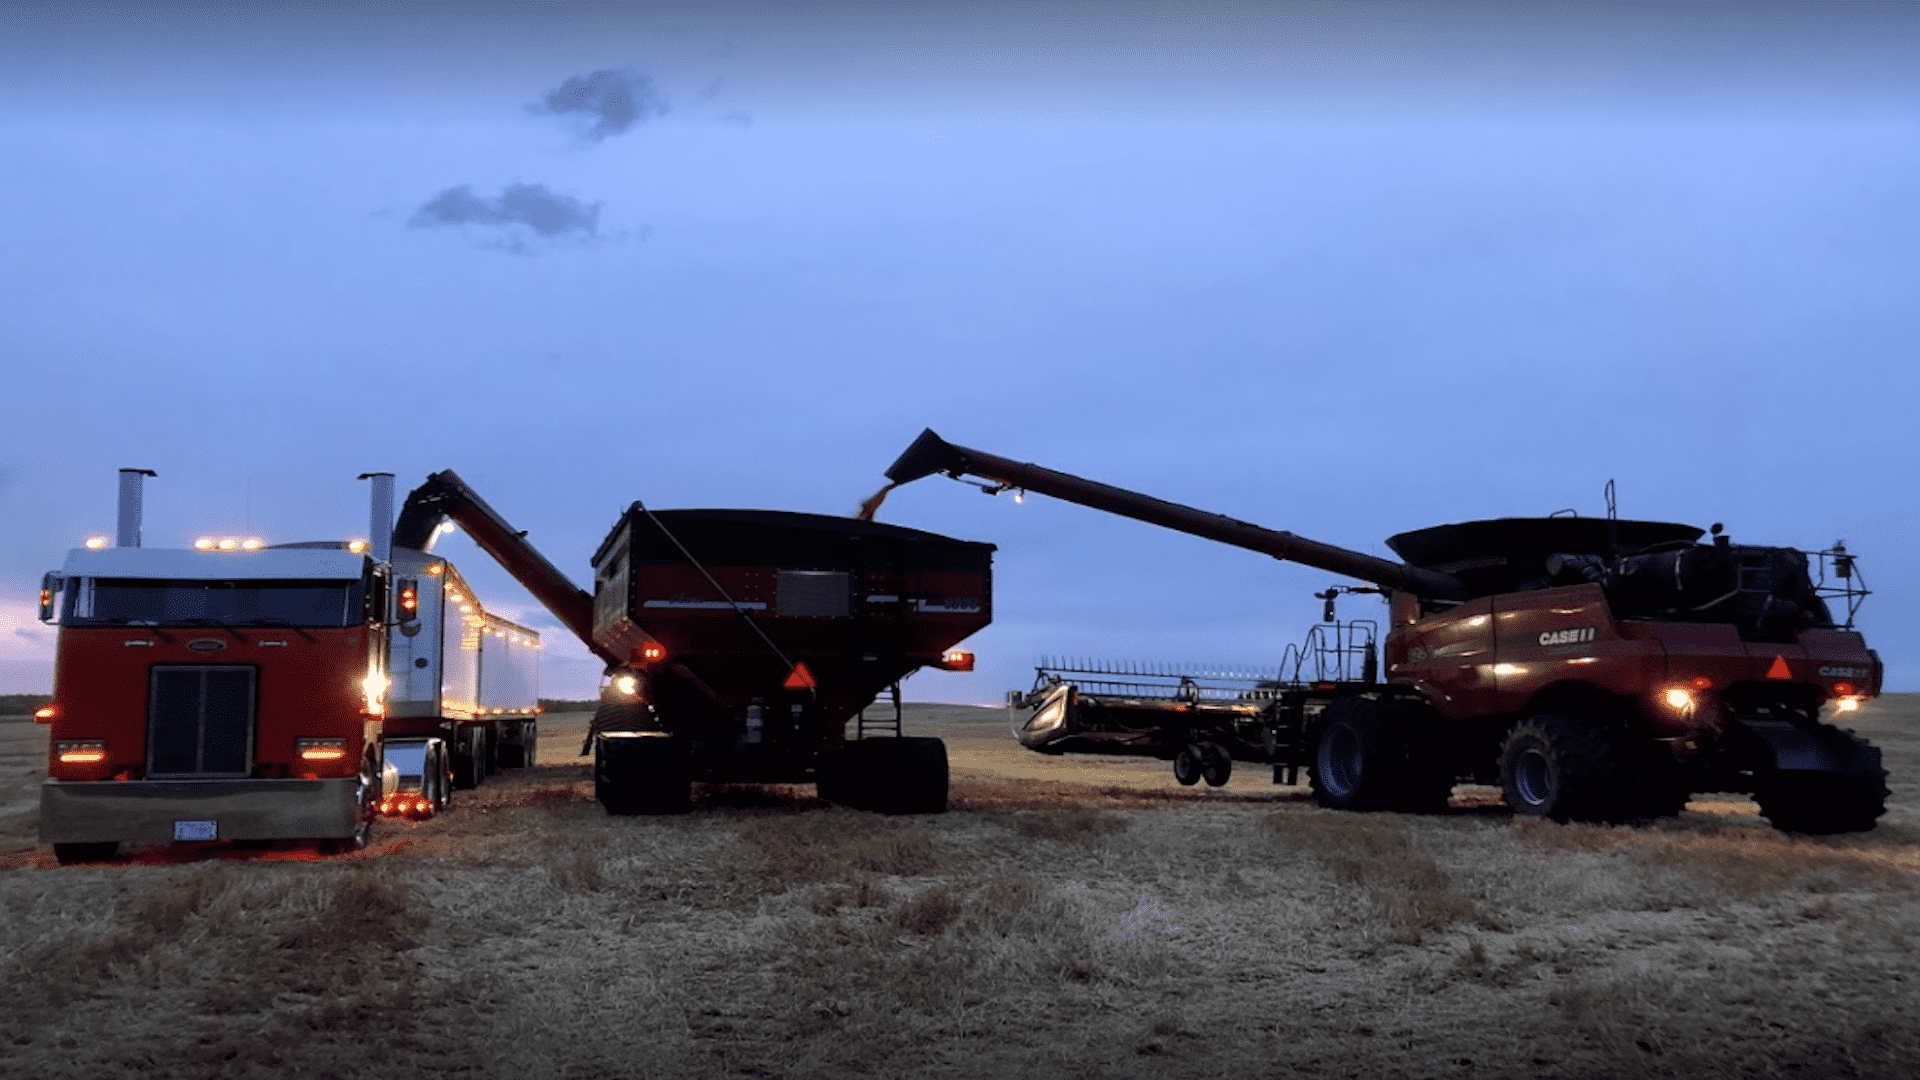 Three Hoppers operating in a field